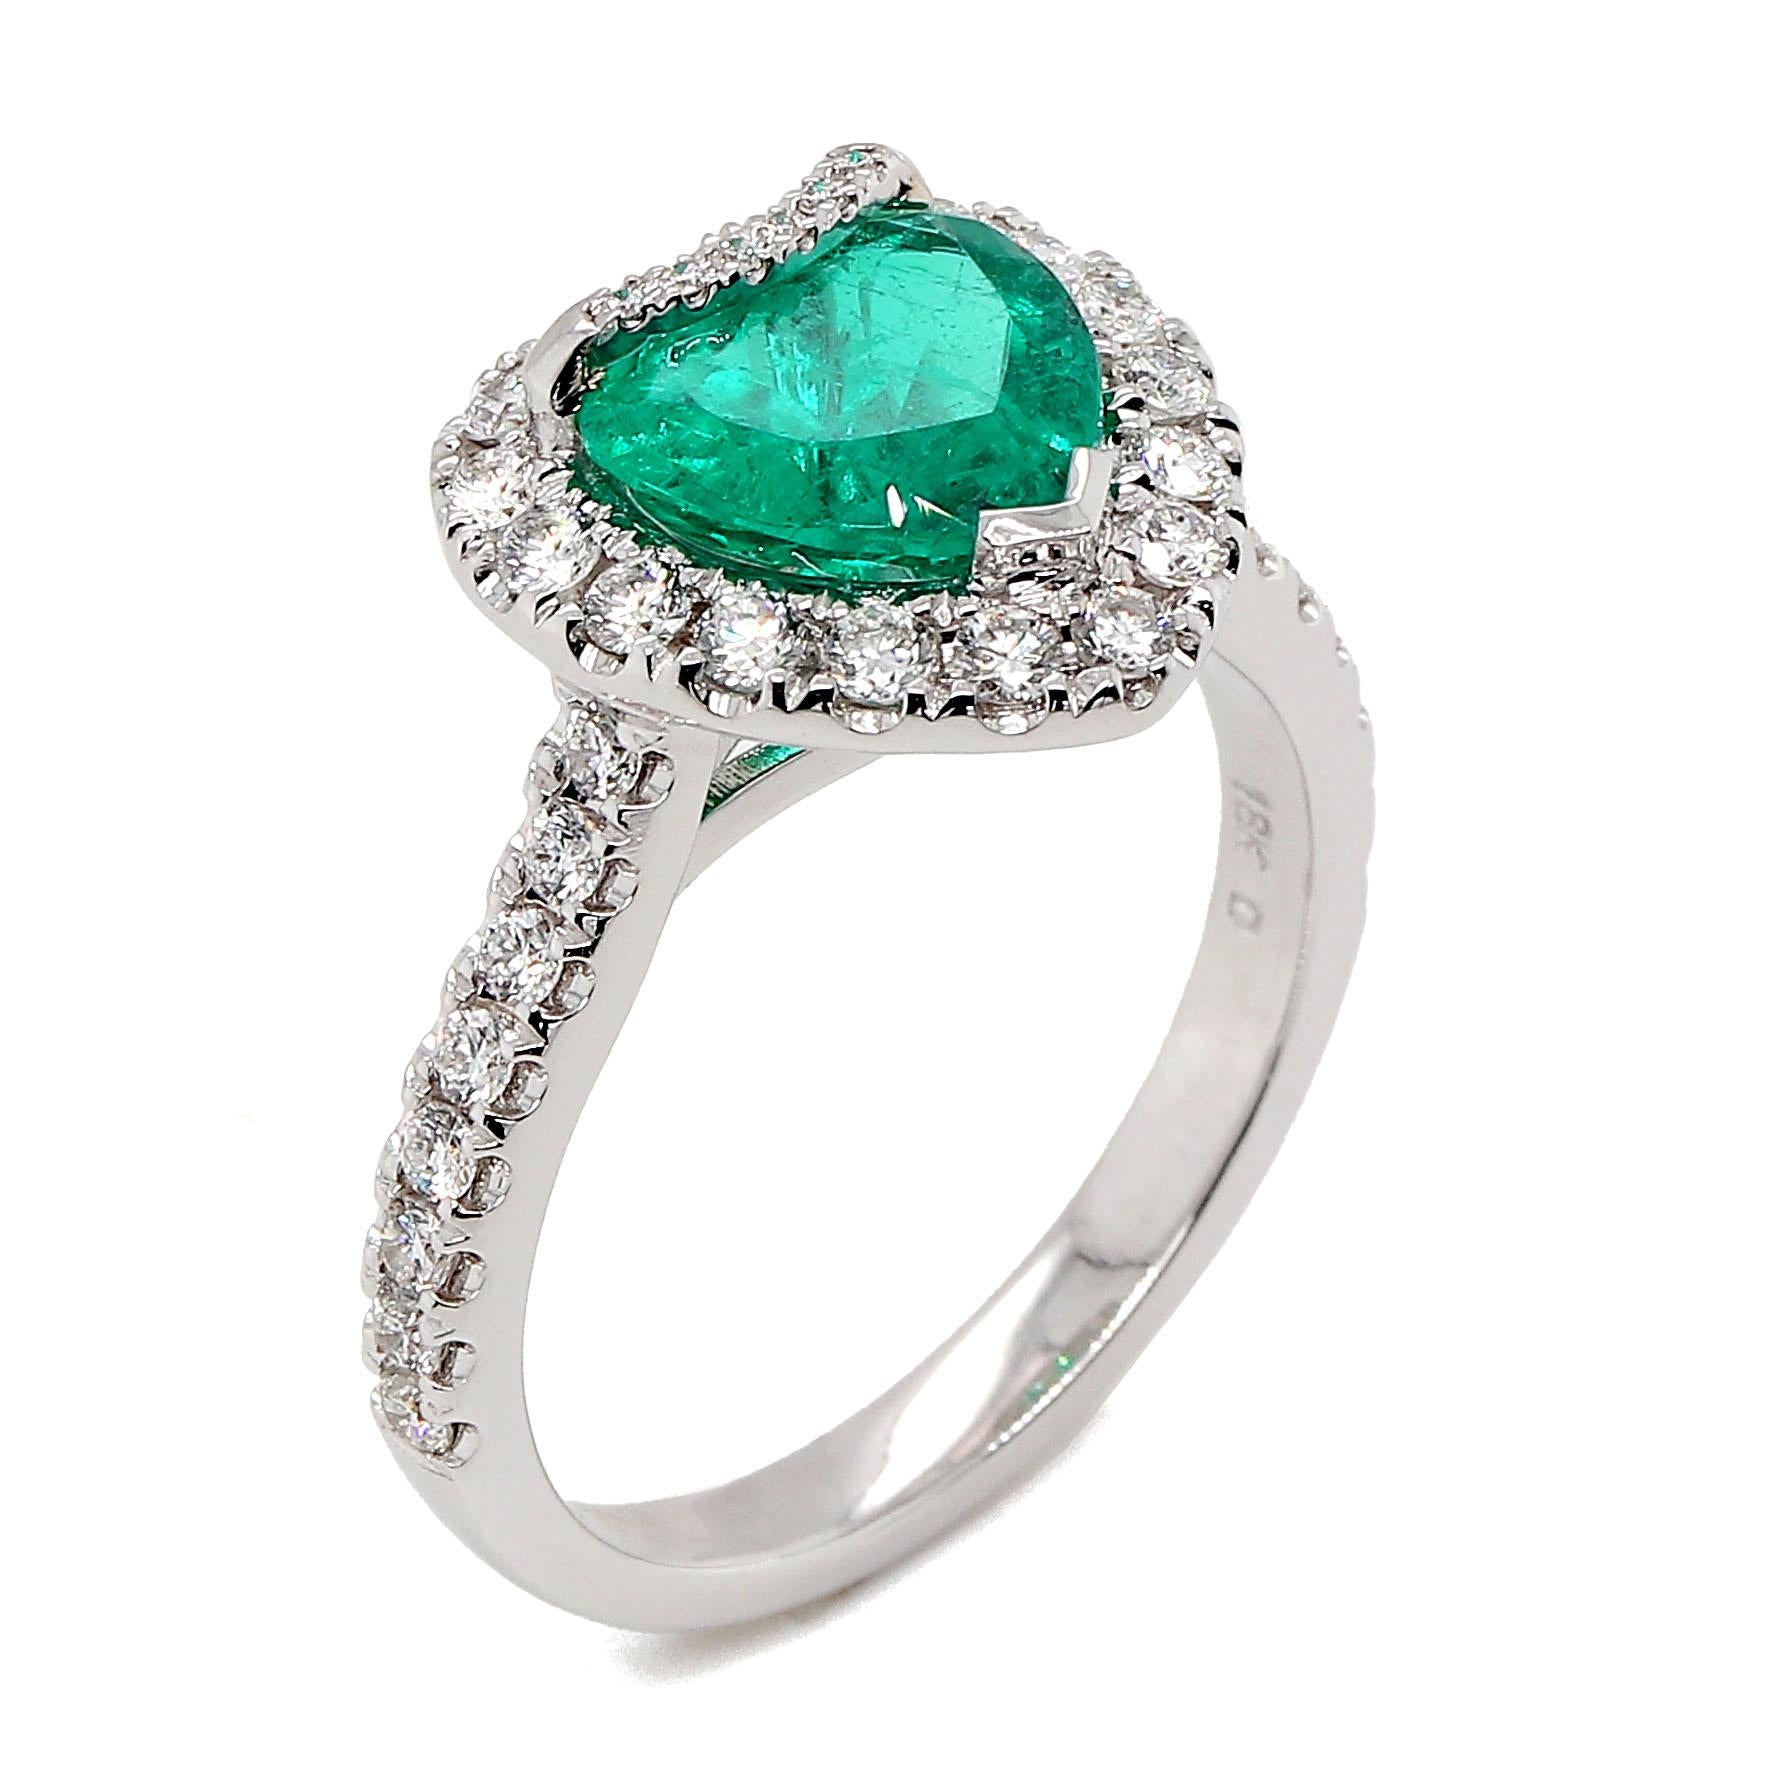 GIA very fine heart shape Emerald of about 1.46 carats measuring 7.96×8.06×4.35mm. The Emerald is surrounded by 40 round brilliant cut diamonds of about 0.55 carats with a clarity of VS and color G. All stones are set in 18k white gold. The total